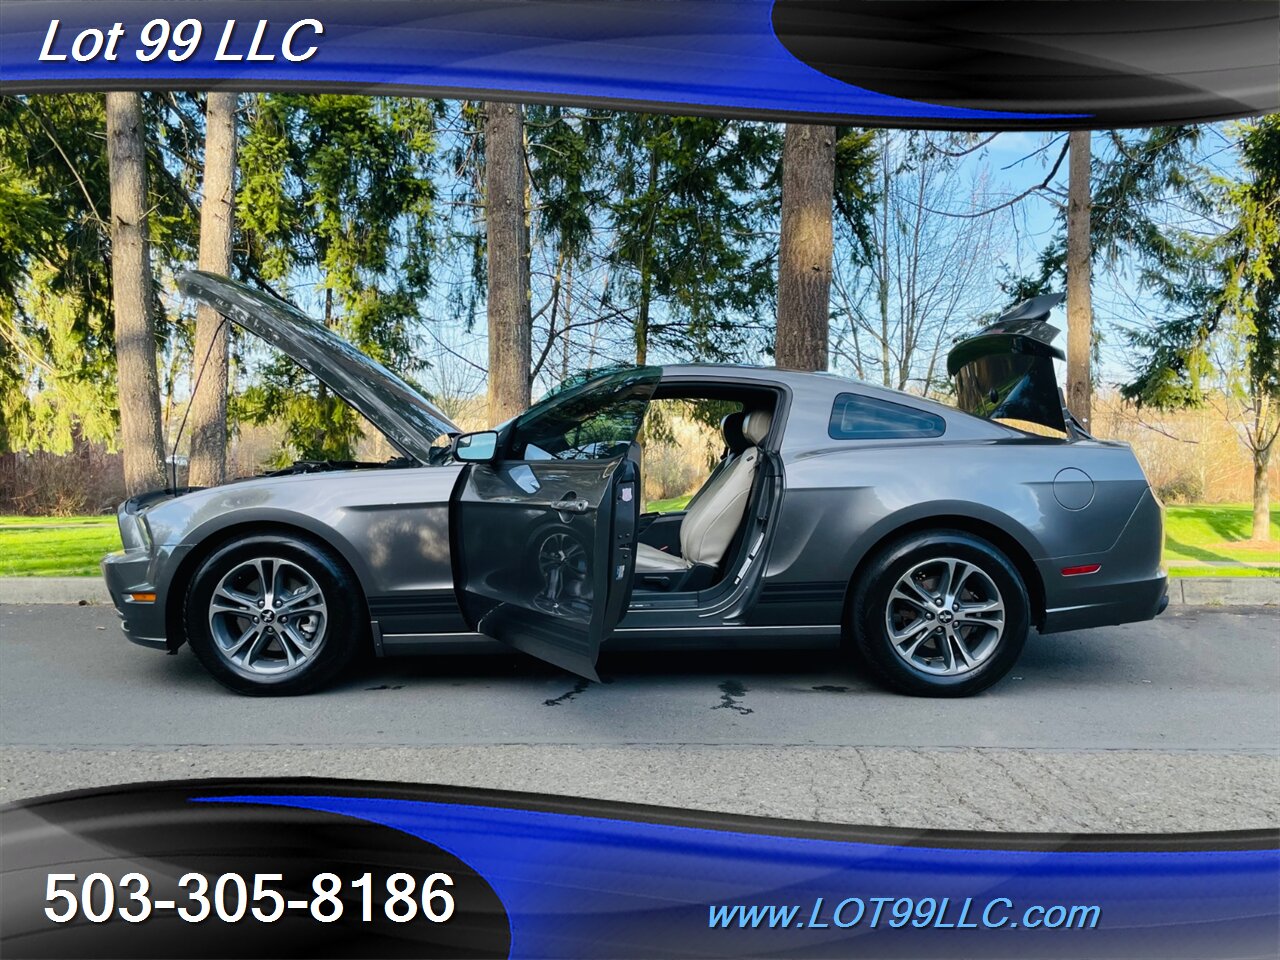 2014 Ford Mustang V6  3.7L V6 305hp  145k Miles Auto, 6-Spd SelectSh   - Photo 19 - Milwaukie, OR 97267